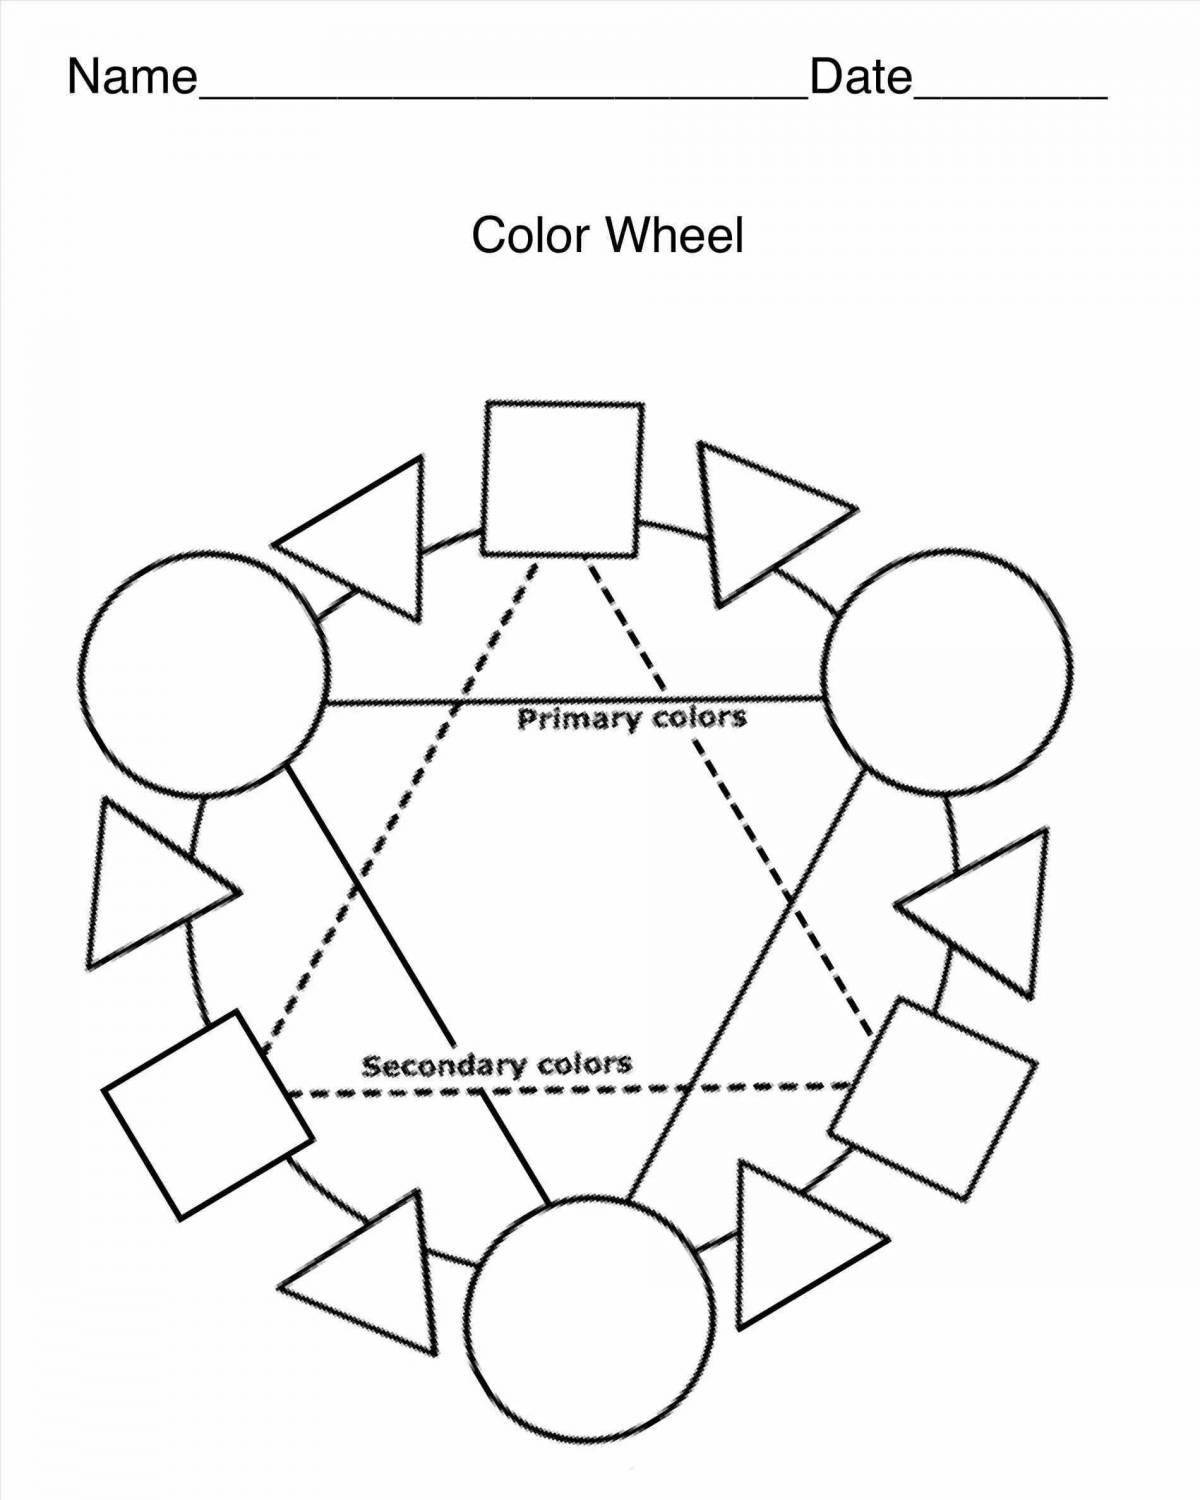 Itten's fascinating coloring of the color wheel